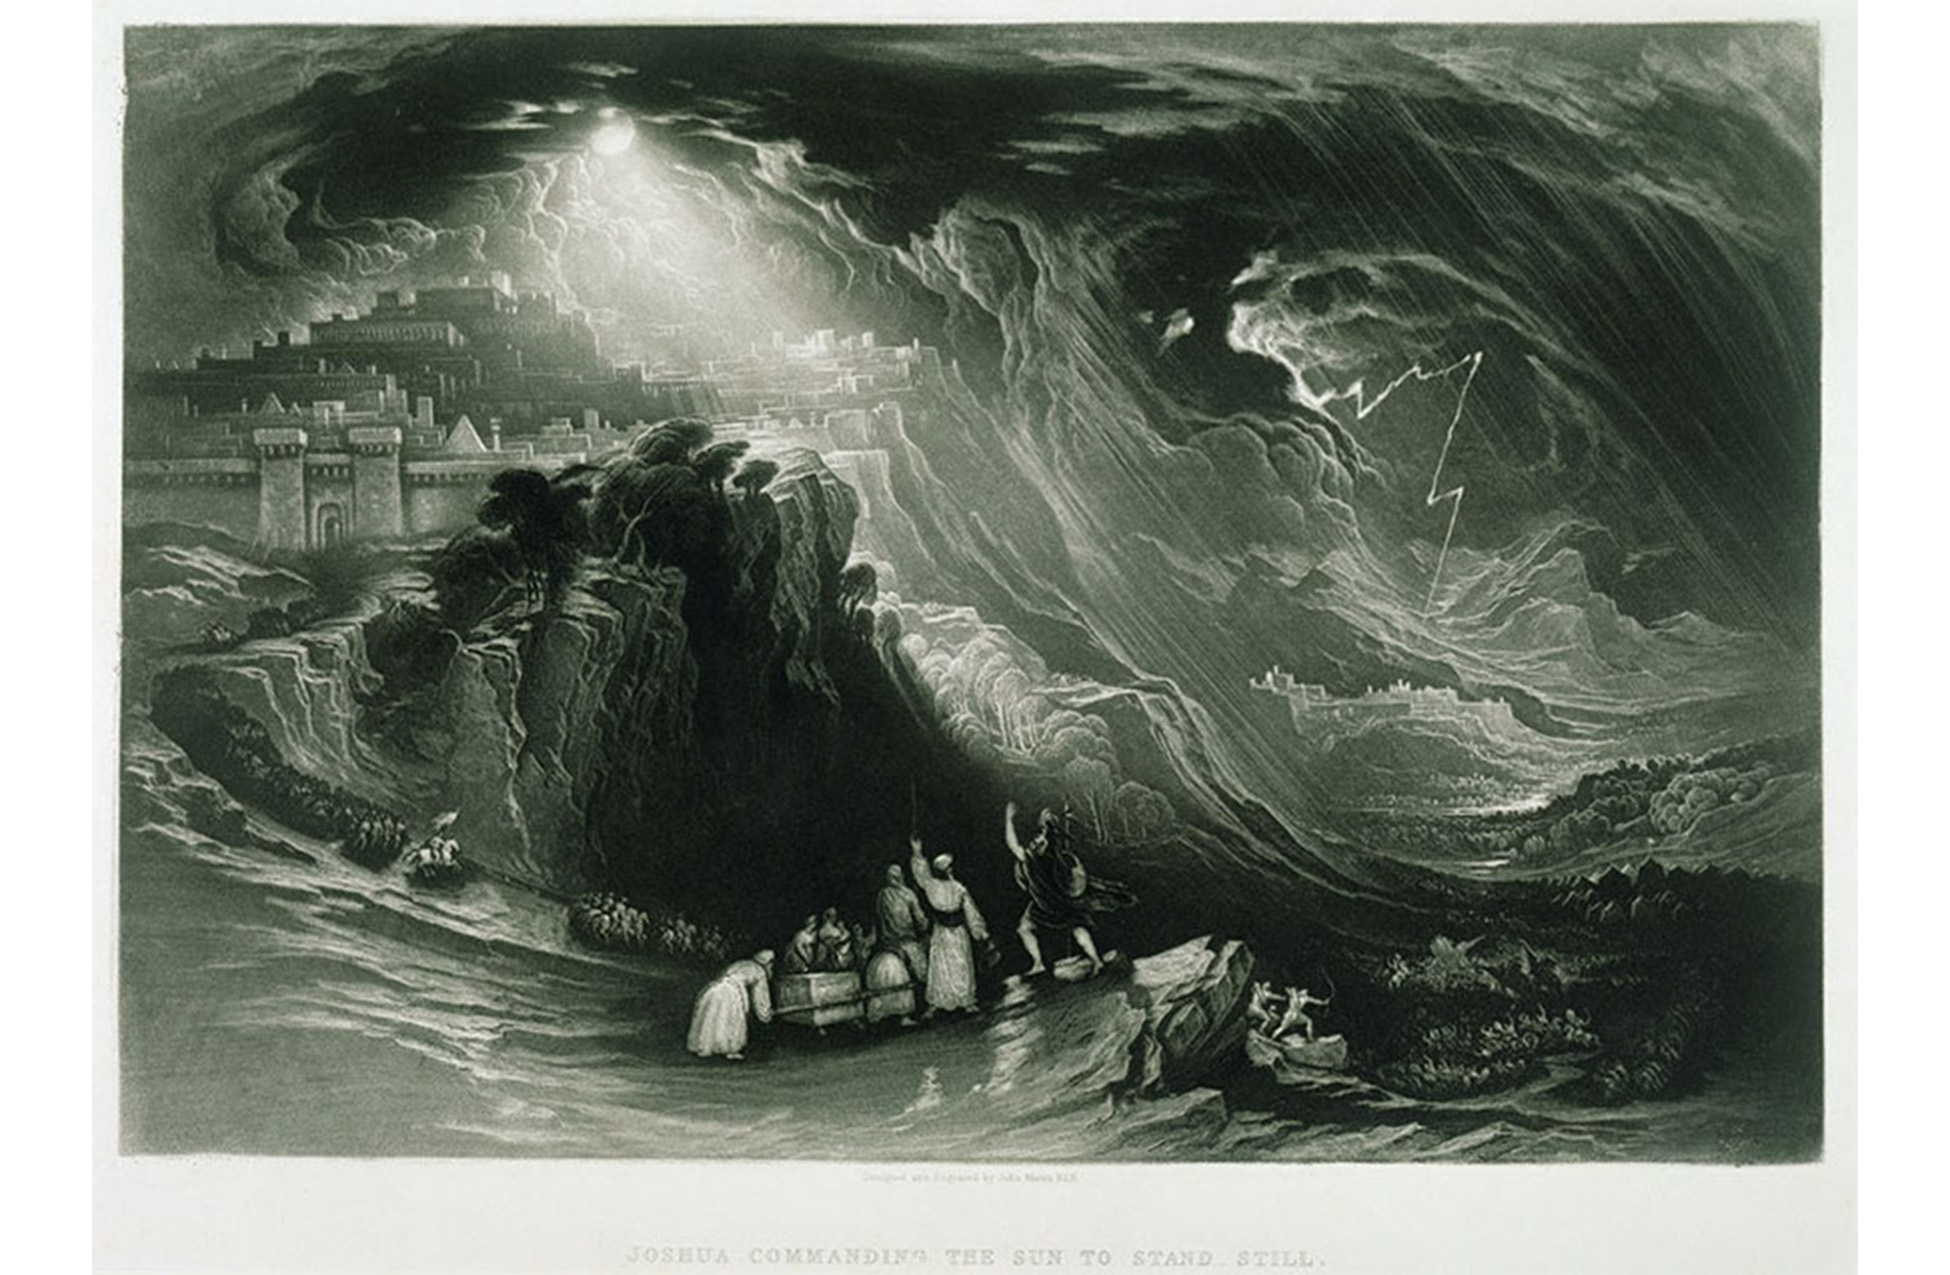 large wave in a storm. people standing at the base of the wave, pointing up at it. buildings in the background in the top left corner.